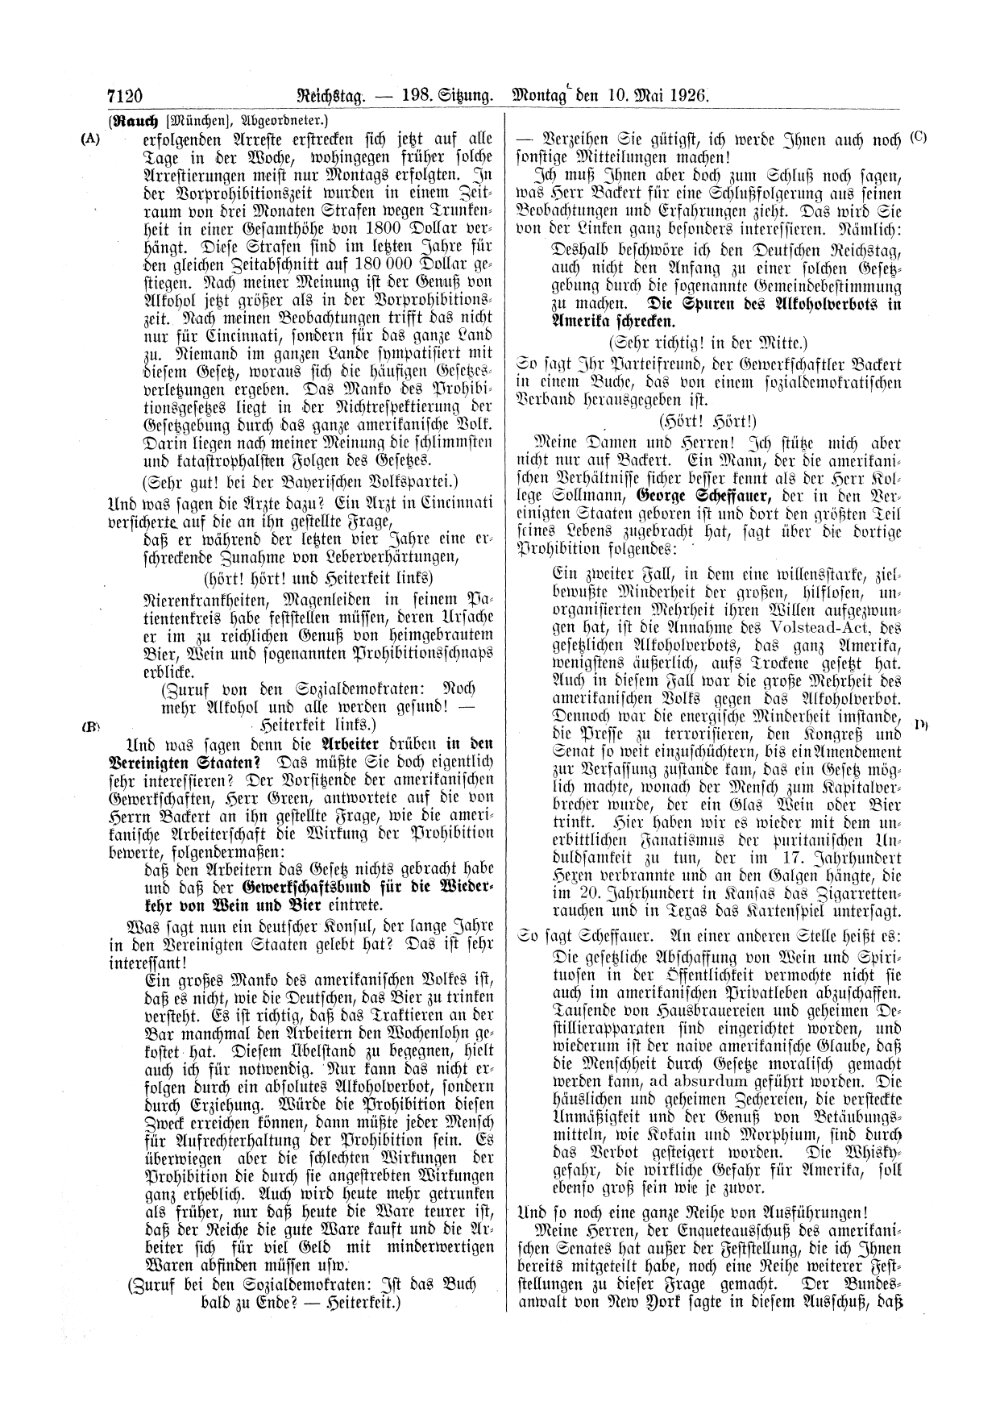 Scan of page 7120